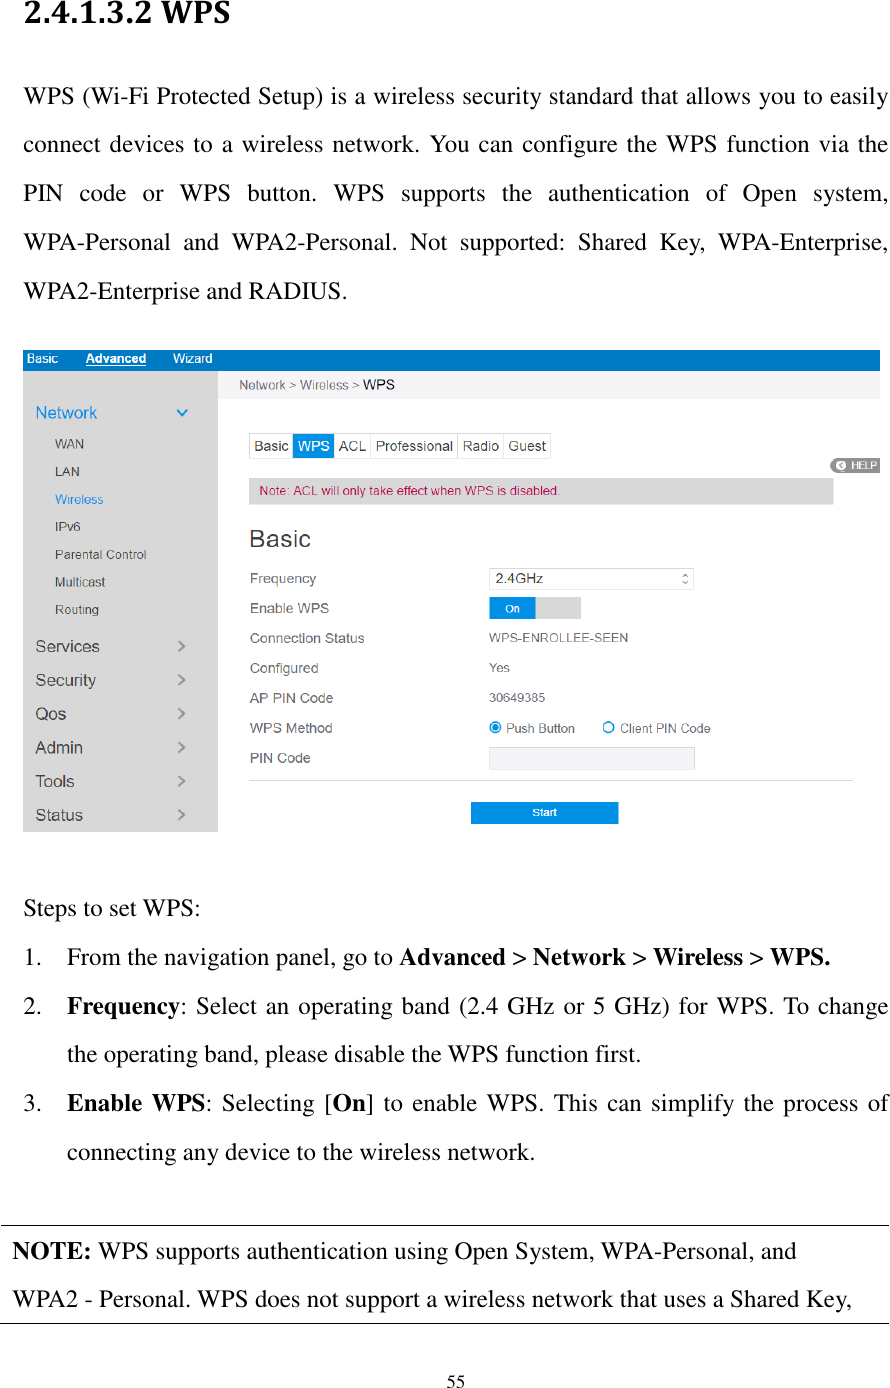  55  2.4.1.3.2 WPS WPS (Wi-Fi Protected Setup) is a wireless security standard that allows you to easily connect devices to a wireless network. You can configure the WPS function via the PIN  code  or  WPS  button.  WPS  supports  the  authentication  of  Open  system, WPA-Personal  and  WPA2-Personal.  Not  supported:  Shared  Key,  WPA-Enterprise, WPA2-Enterprise and RADIUS.    Steps to set WPS:   1. From the navigation panel, go to Advanced &gt; Network &gt; Wireless &gt; WPS. 2. Frequency: Select an operating band (2.4 GHz or 5 GHz) for WPS. To change the operating band, please disable the WPS function first. 3. Enable WPS: Selecting [On] to enable WPS. This can simplify the process of connecting any device to the wireless network.    NOTE: WPS supports authentication using Open System, WPA-Personal, and   WPA2 - Personal. WPS does not support a wireless network that uses a Shared Key,   